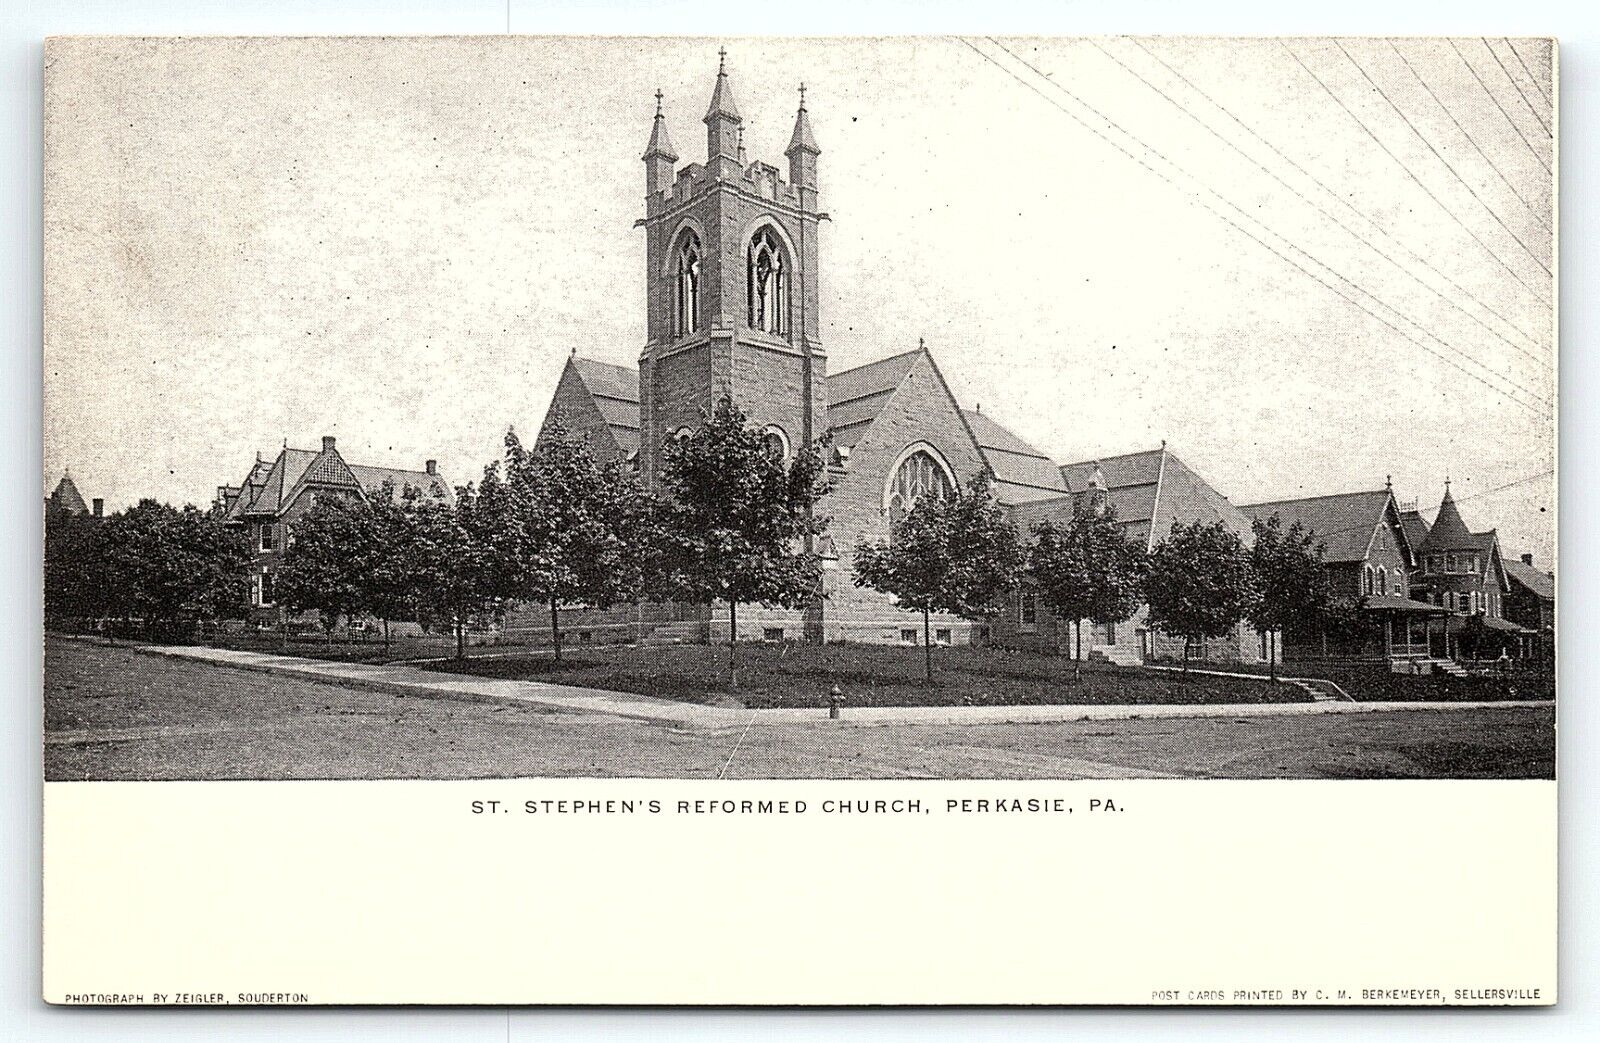 c1905 PERKASIE PA ST STEPHEN\'S REFORMED CHURCH EARLY UNDIVIDED POSTCARD P3968